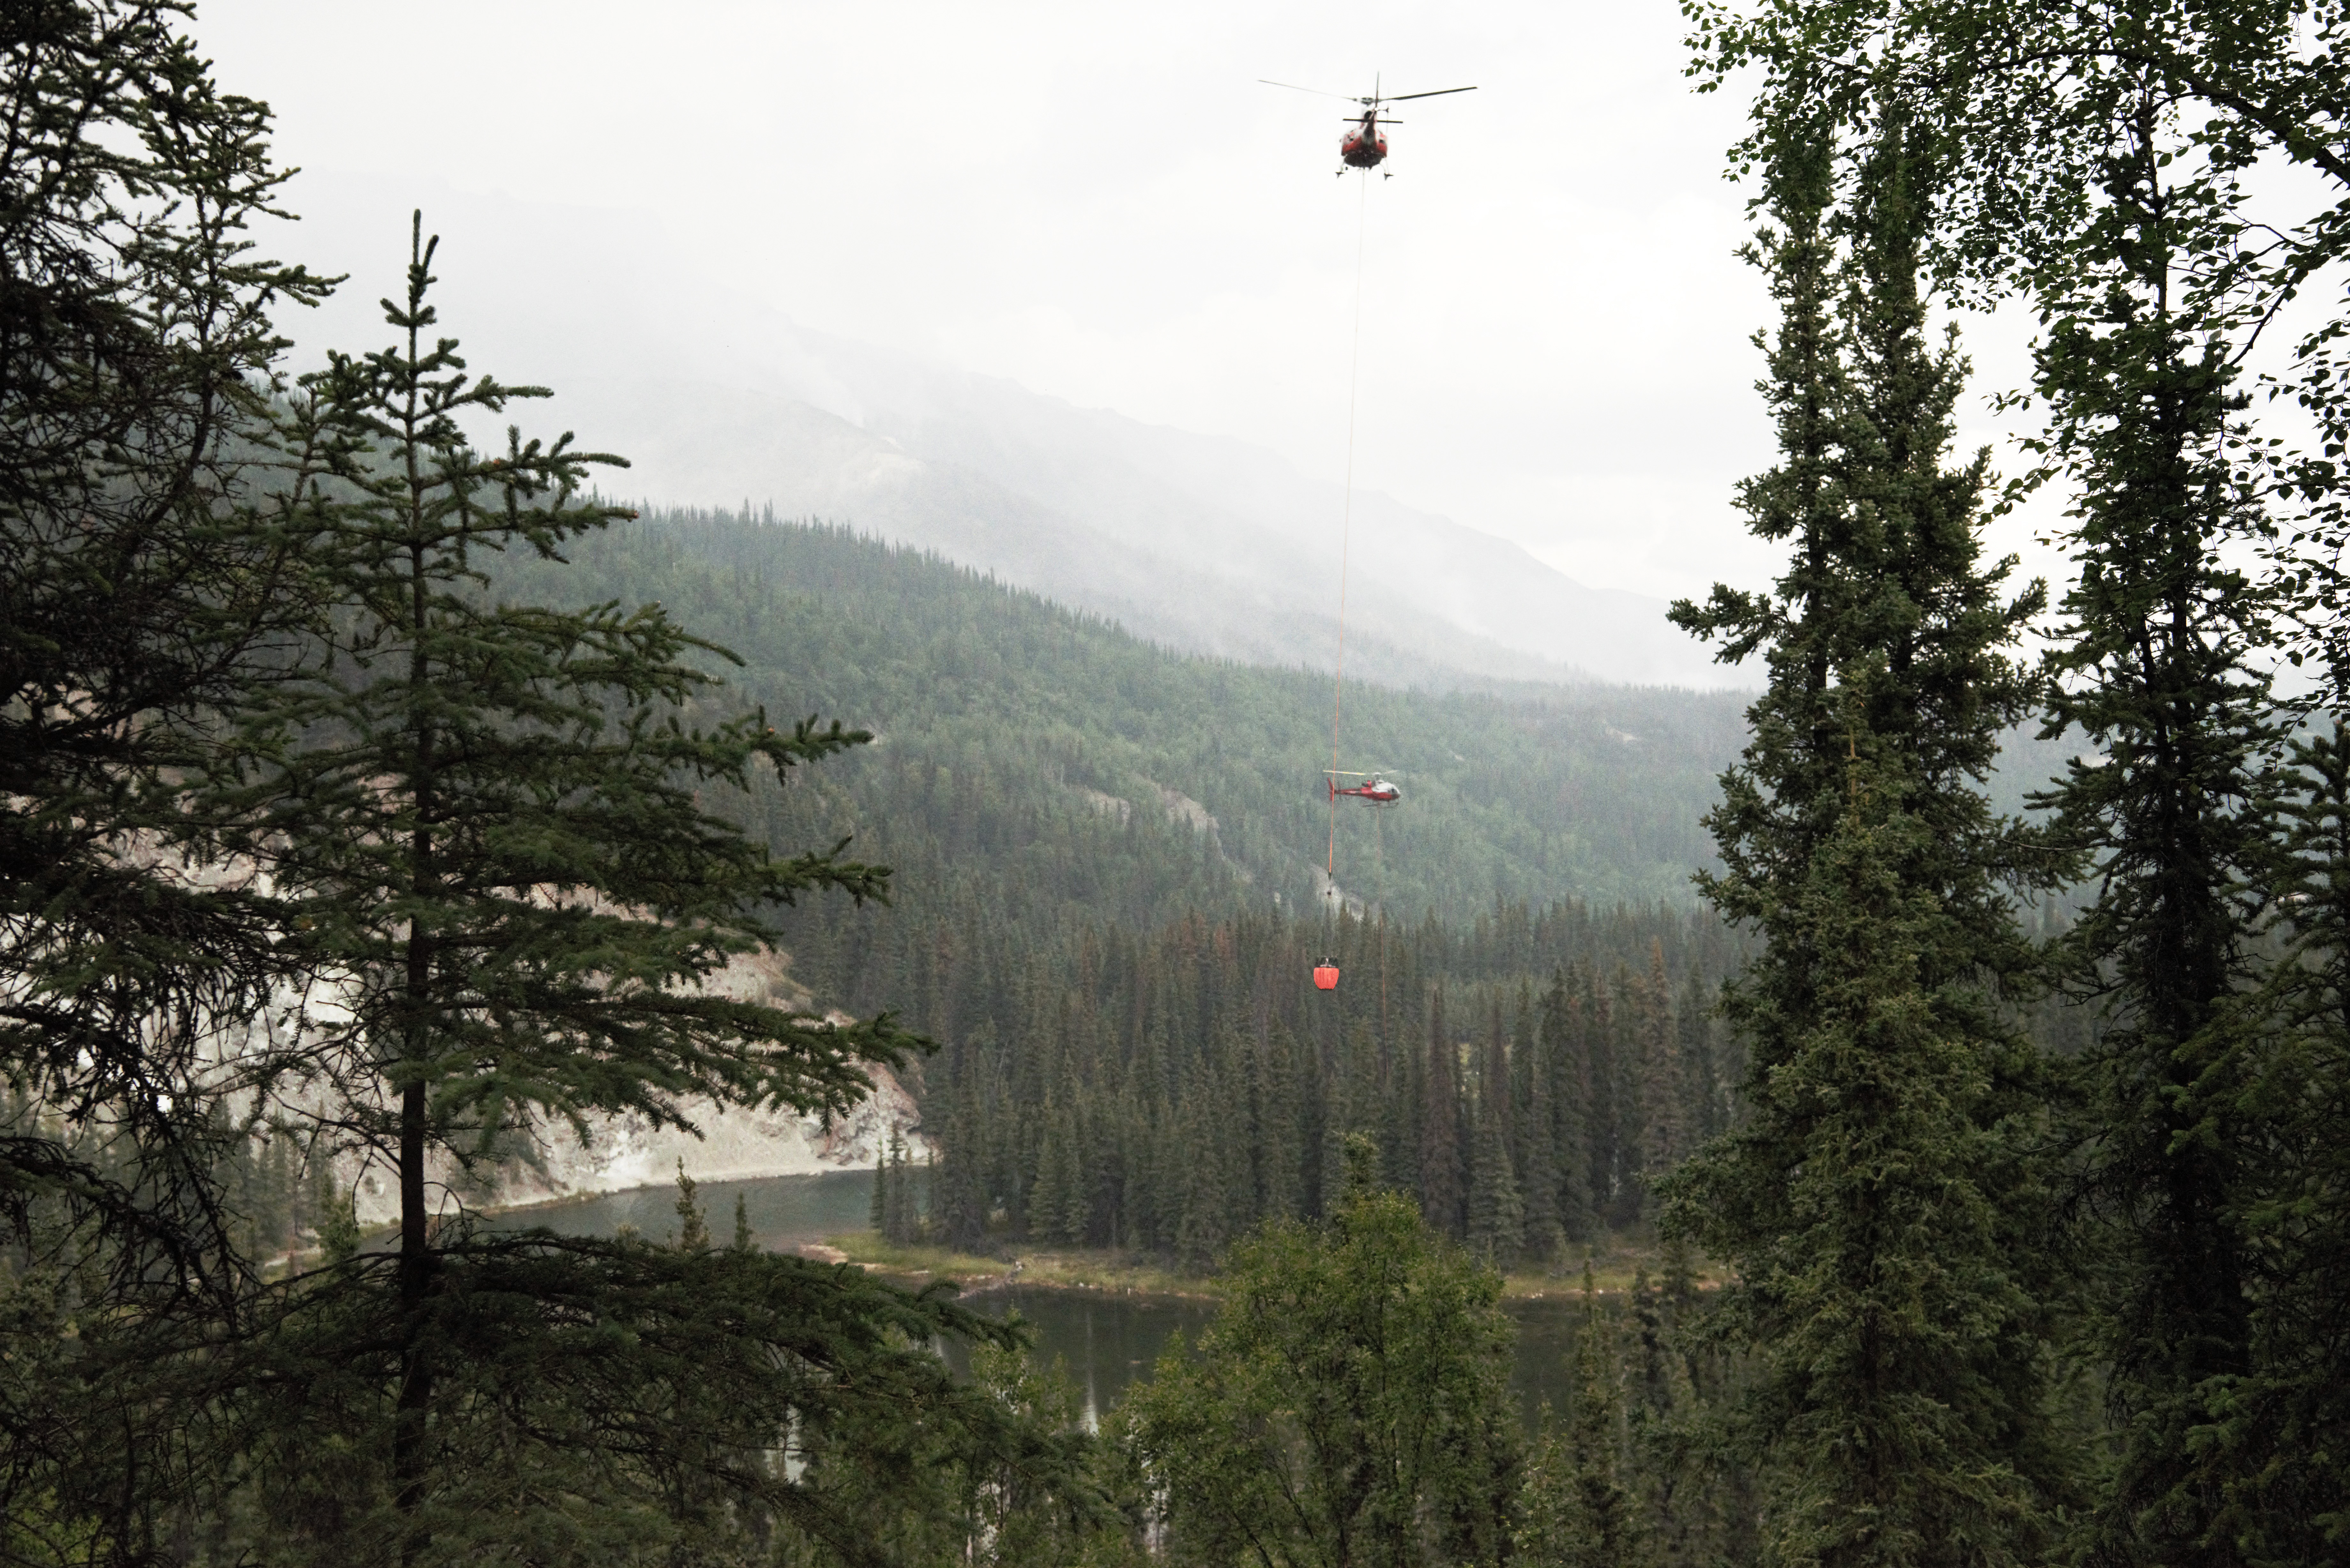 Two red helicopters drawing water from a lake below using orange buckets.  Smoke is rising in the mountainous background